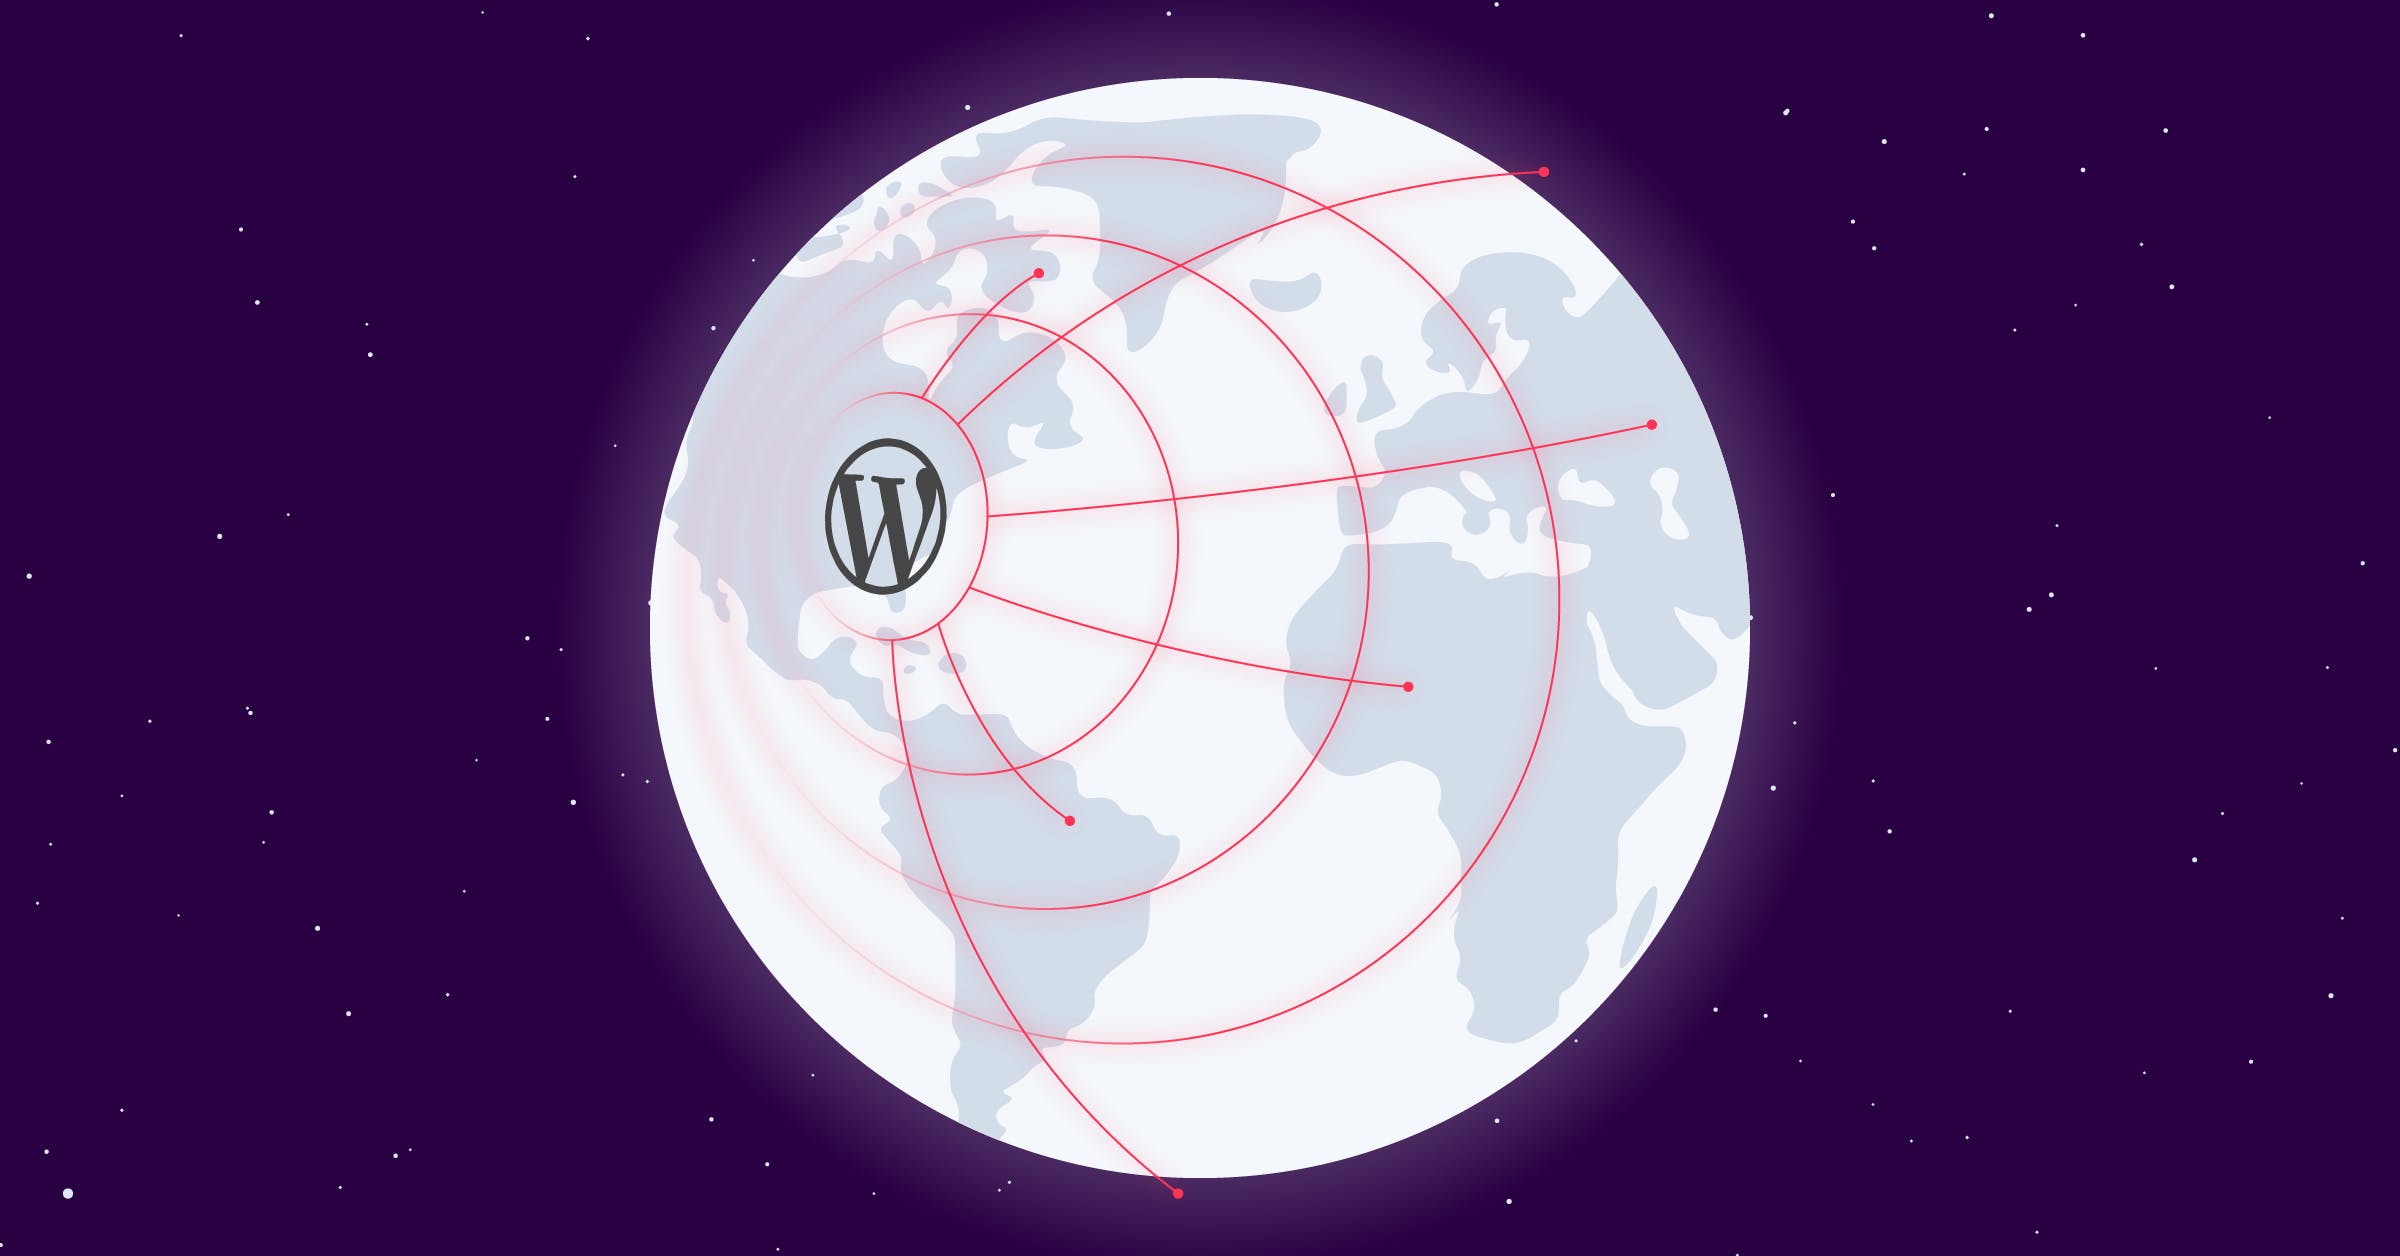 Our security researchers were surprised to discover a low-hanging code vulnerability in WordPress Core that we will discuss in this blog post.